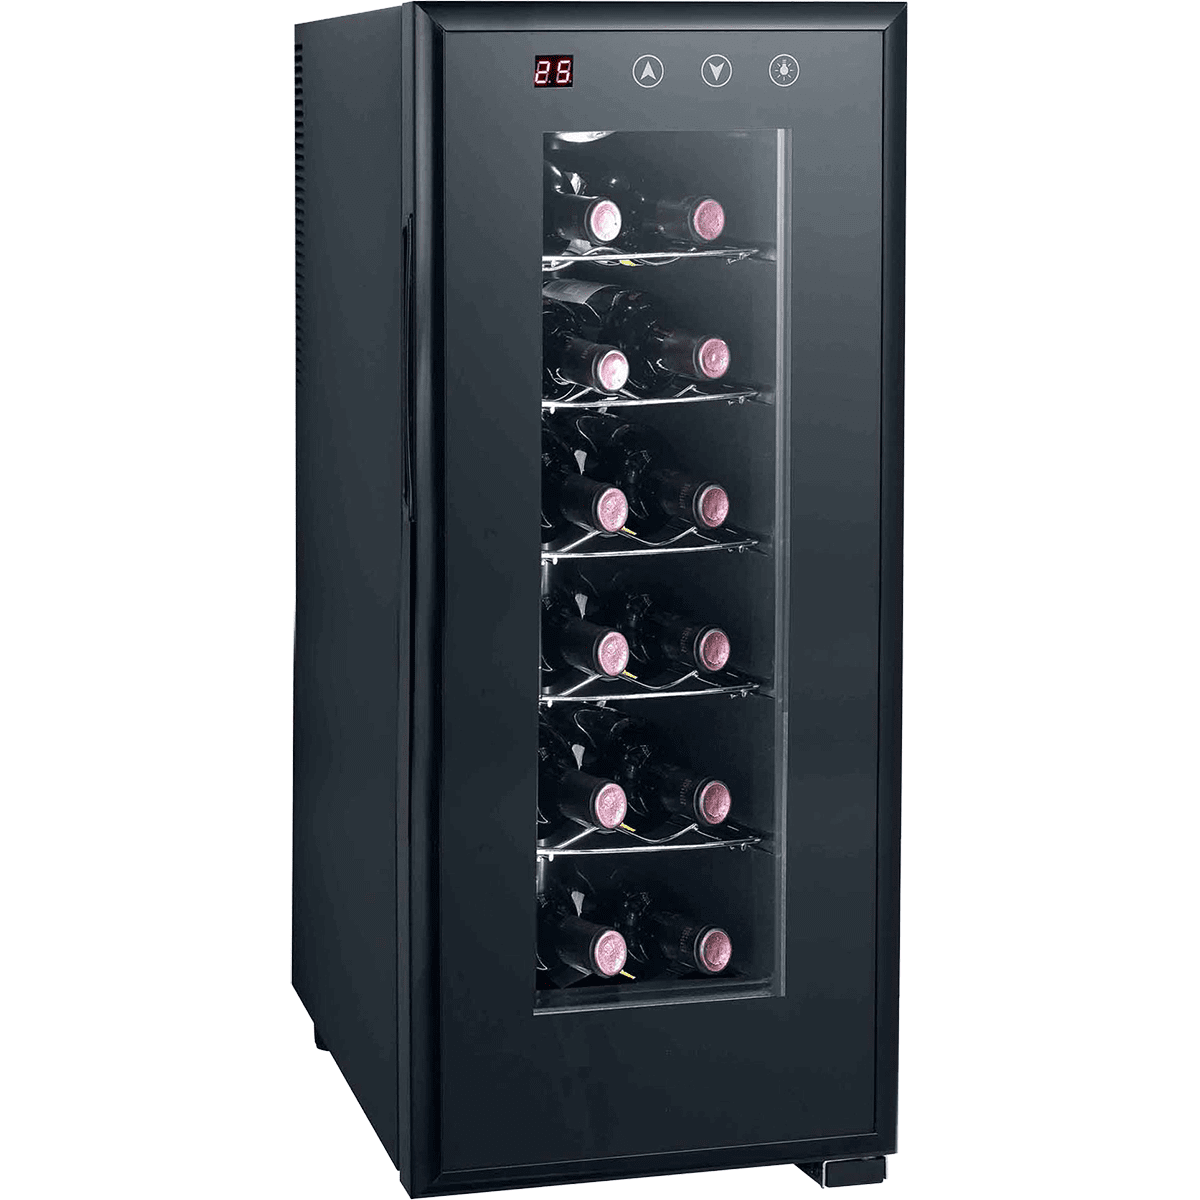 Sunpentown Thermoelectric 12 Bottle Wine Cooler W/ Heating (wc-1272h)